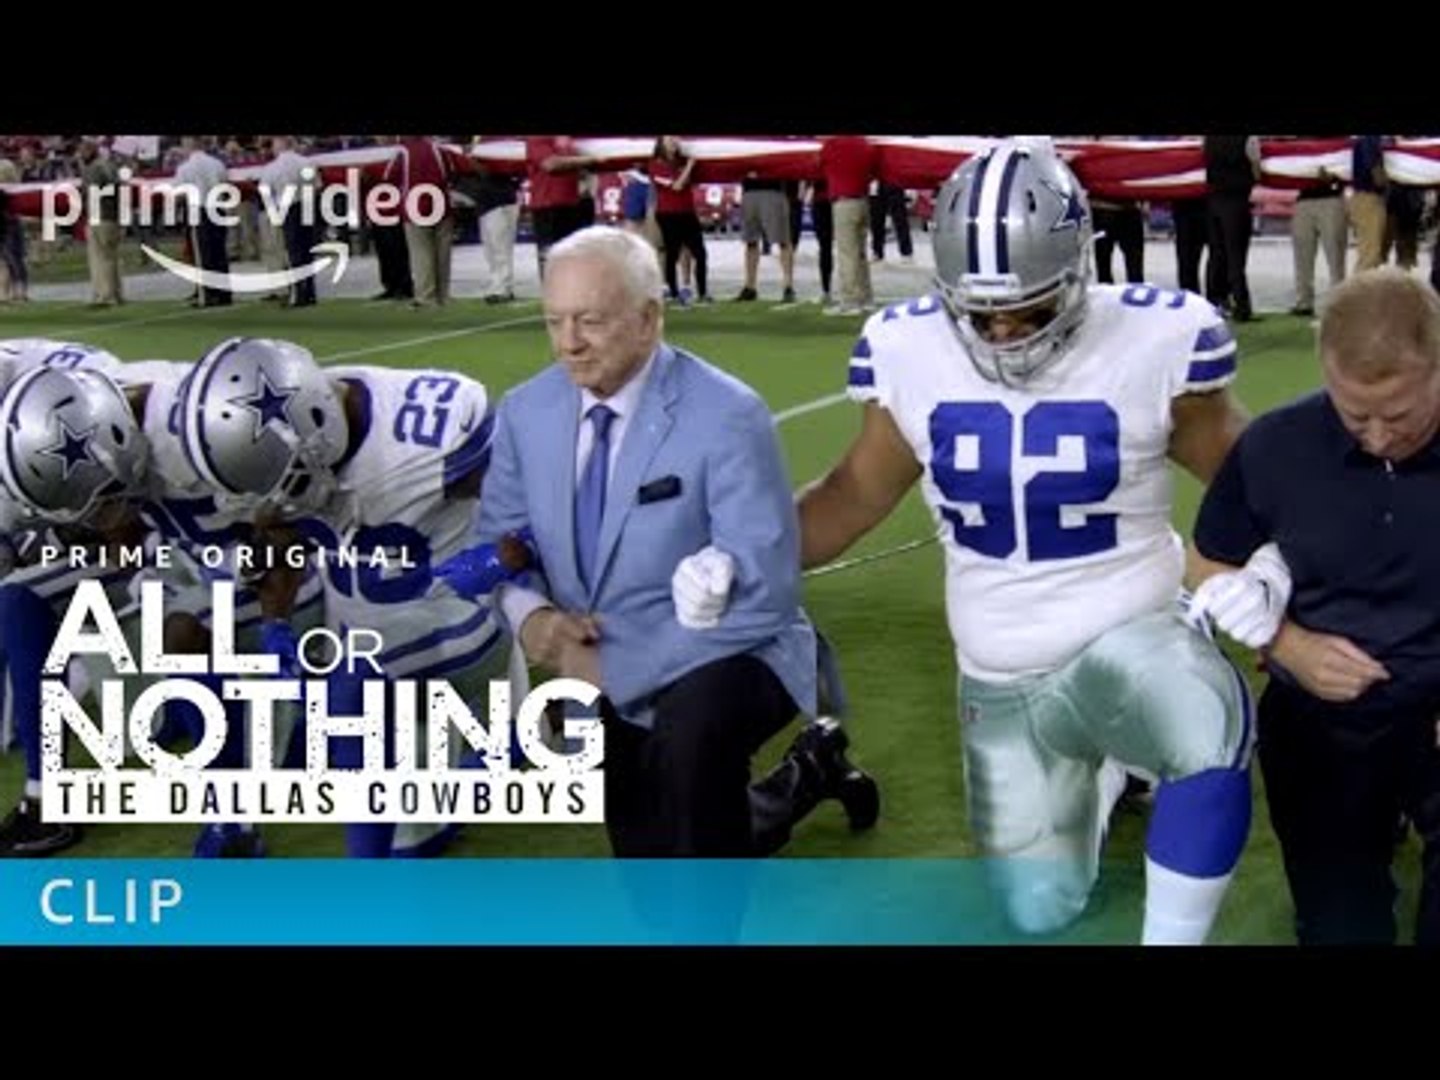 All or Nothing The Dallas Cowboys - Clip National Anthem Prime Video